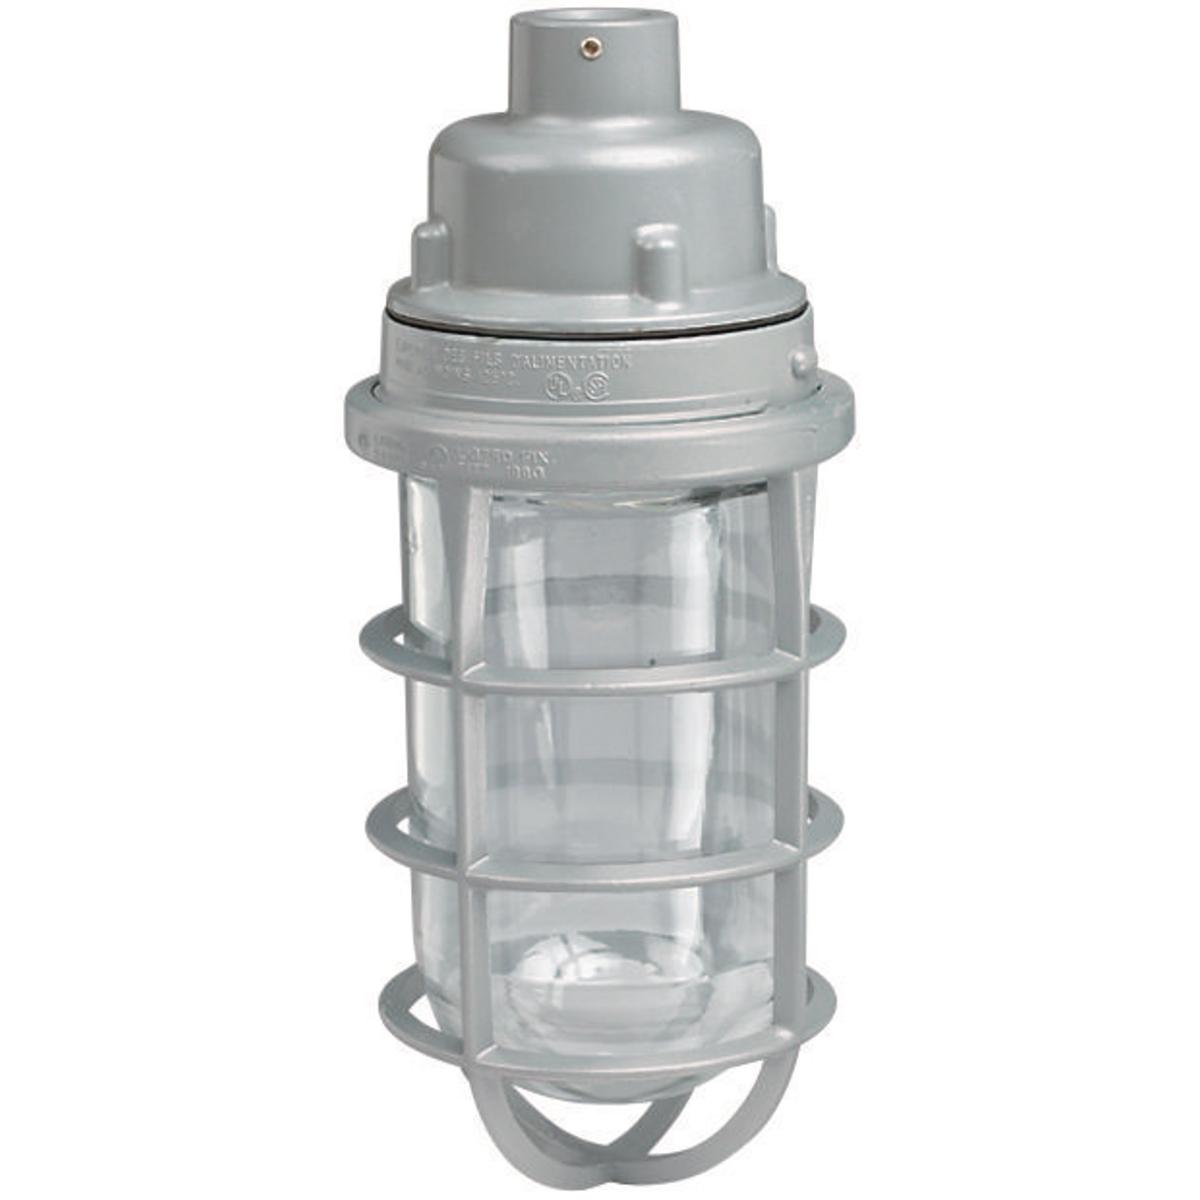 Hubbell VUAGG-2-100 100W V Series Incandescent - Pendant - 3/4" Hub With Globe and Guard  ; Electrostatically applied epoxy/polyester finish ; Modular design ; Hubs are threaded for attachment to conduit ; Set screws in pendant fixture ; Copper-free aluminum (less than .004%